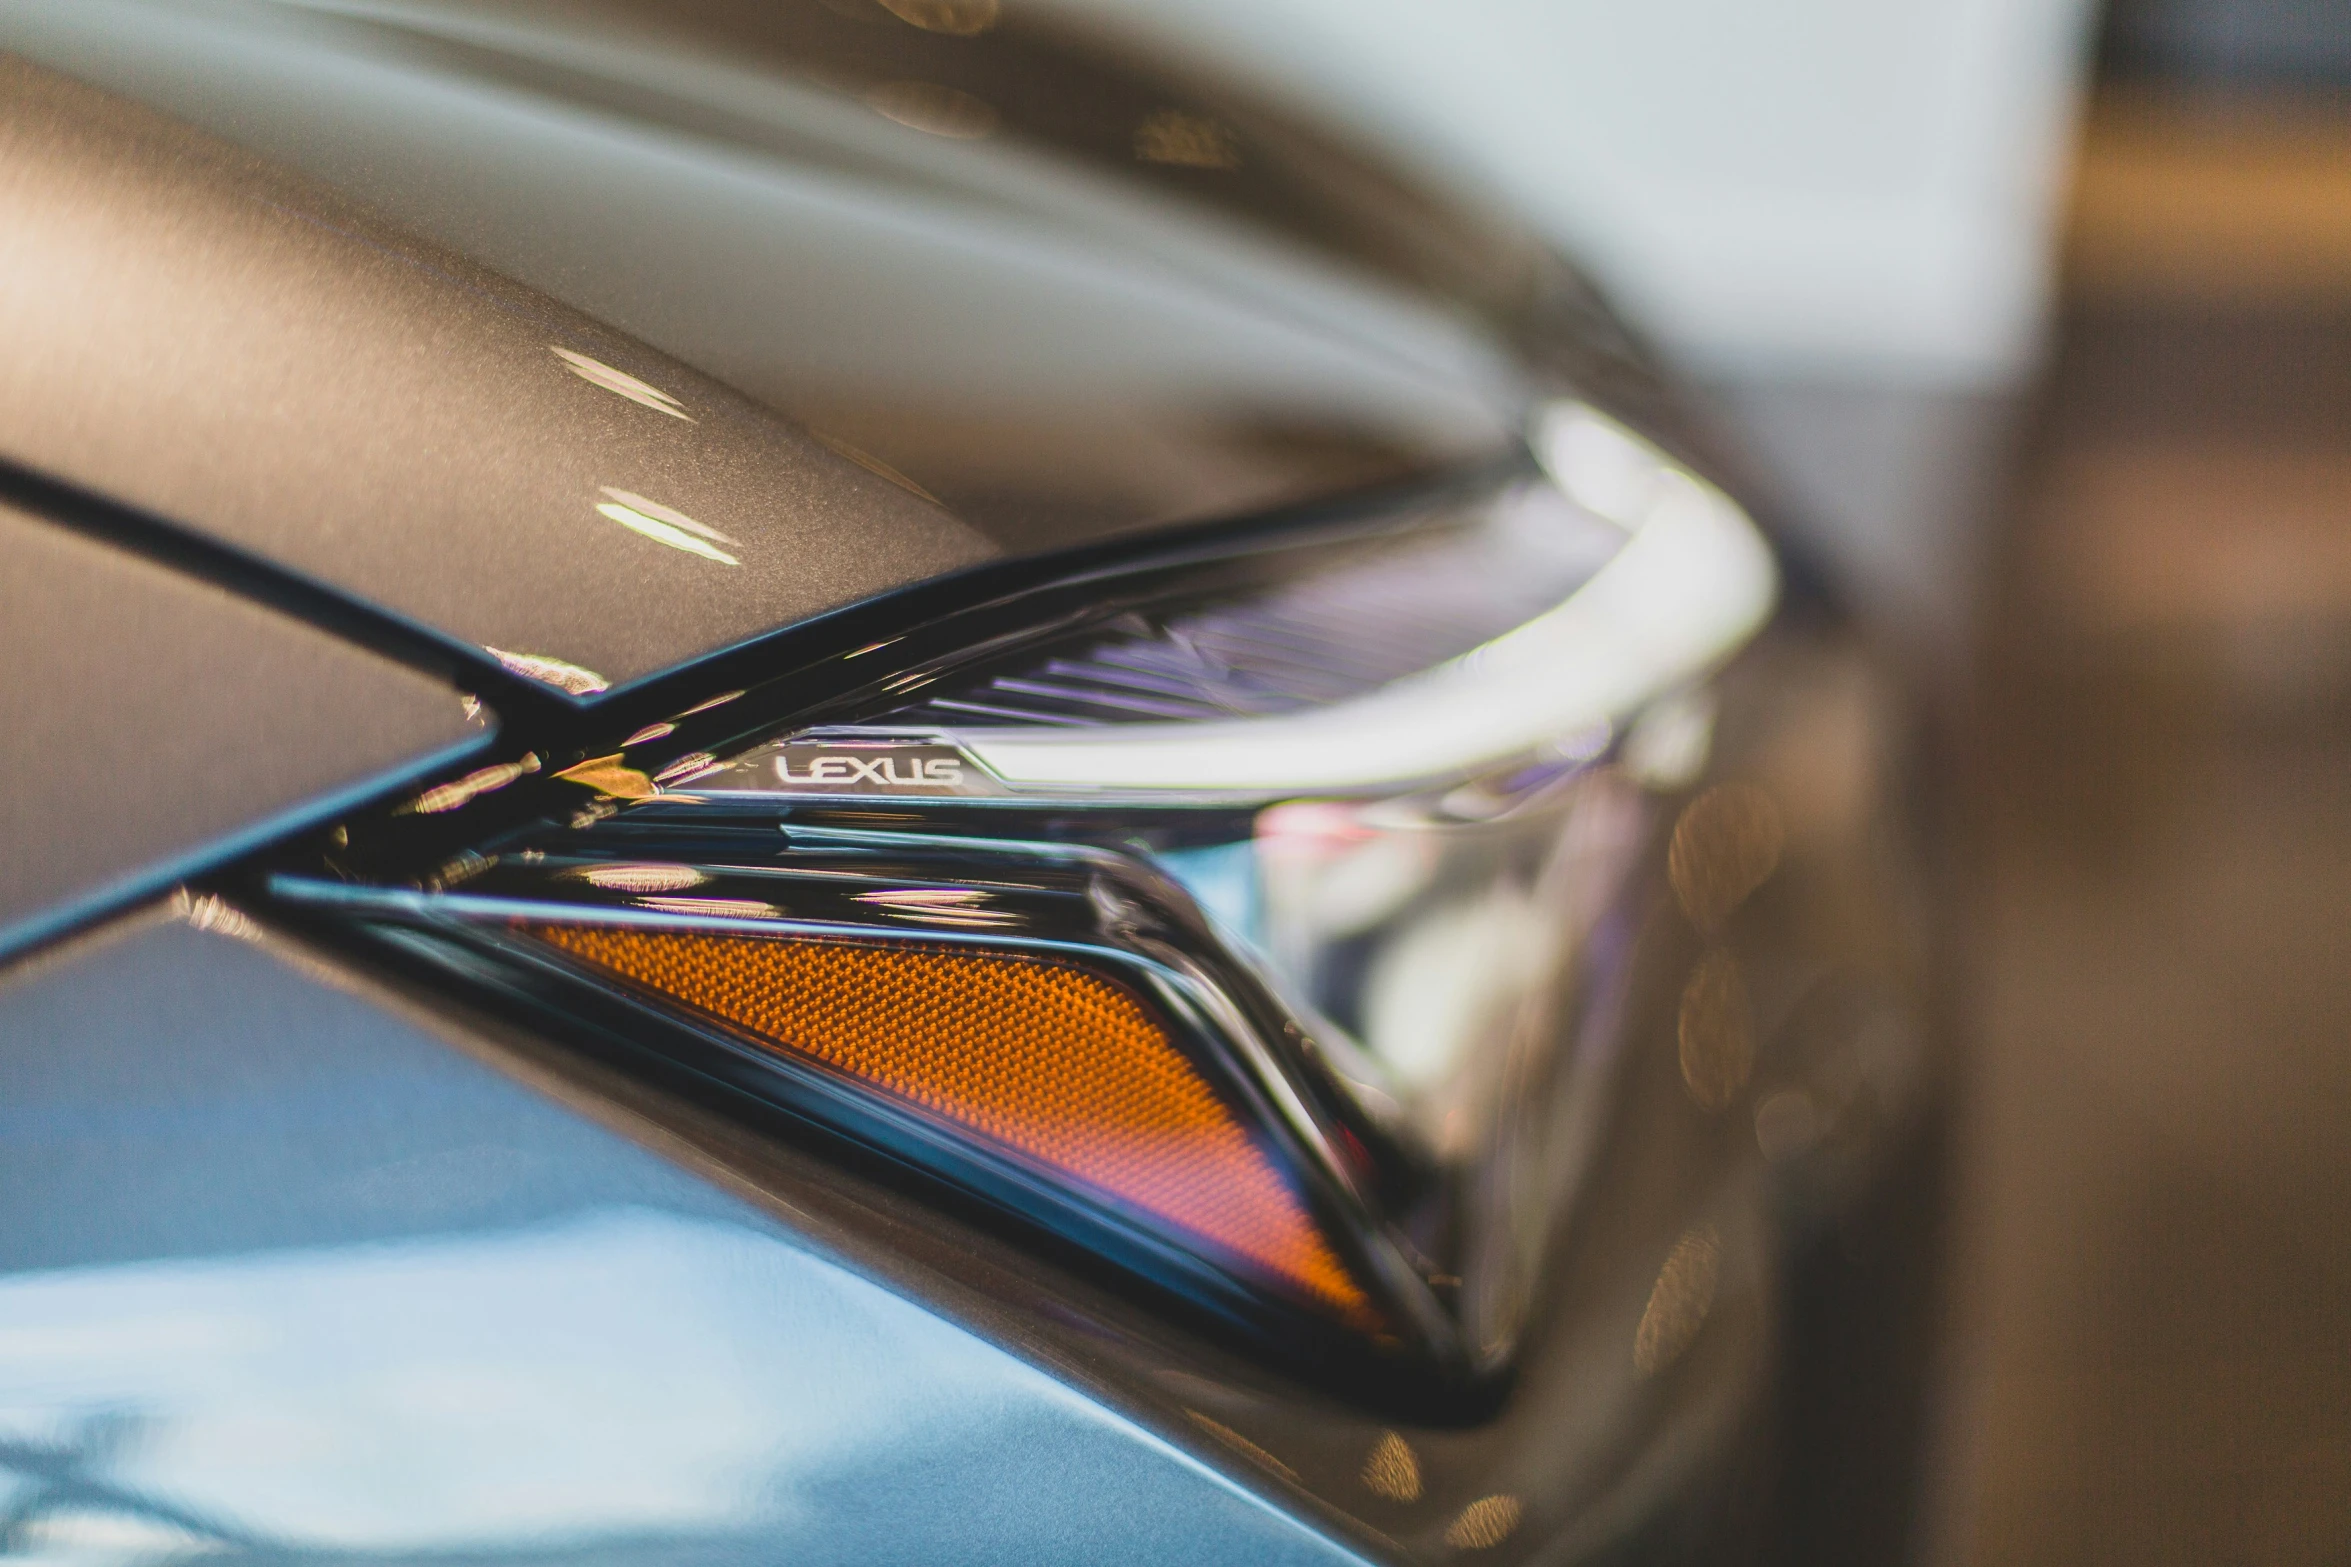 the front view mirror of a sleek car